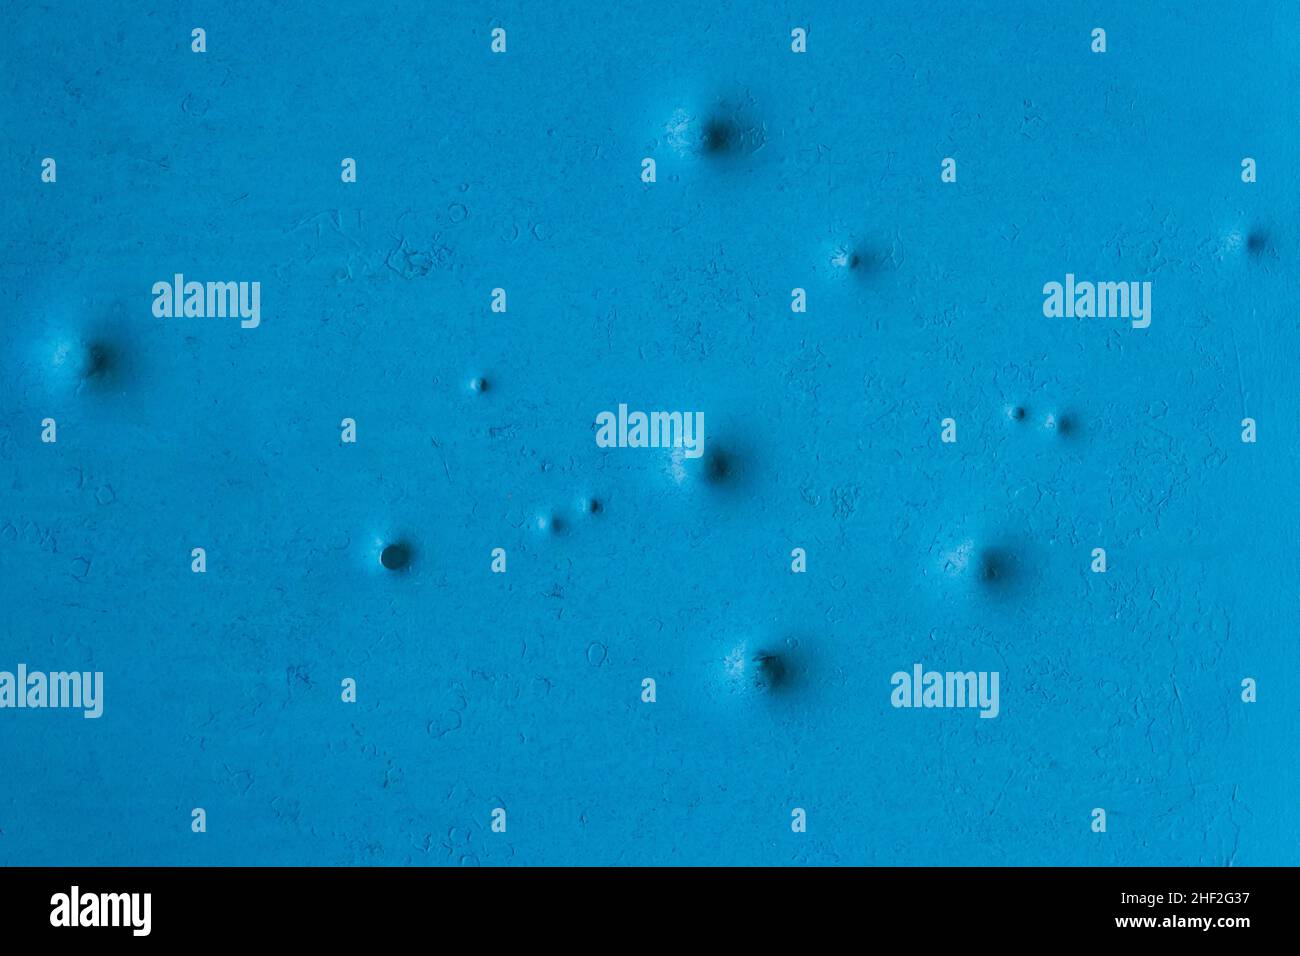 Dents pattern, holes or bullet shot marks on the blue metal surface of the old background iron texture. Stock Photo